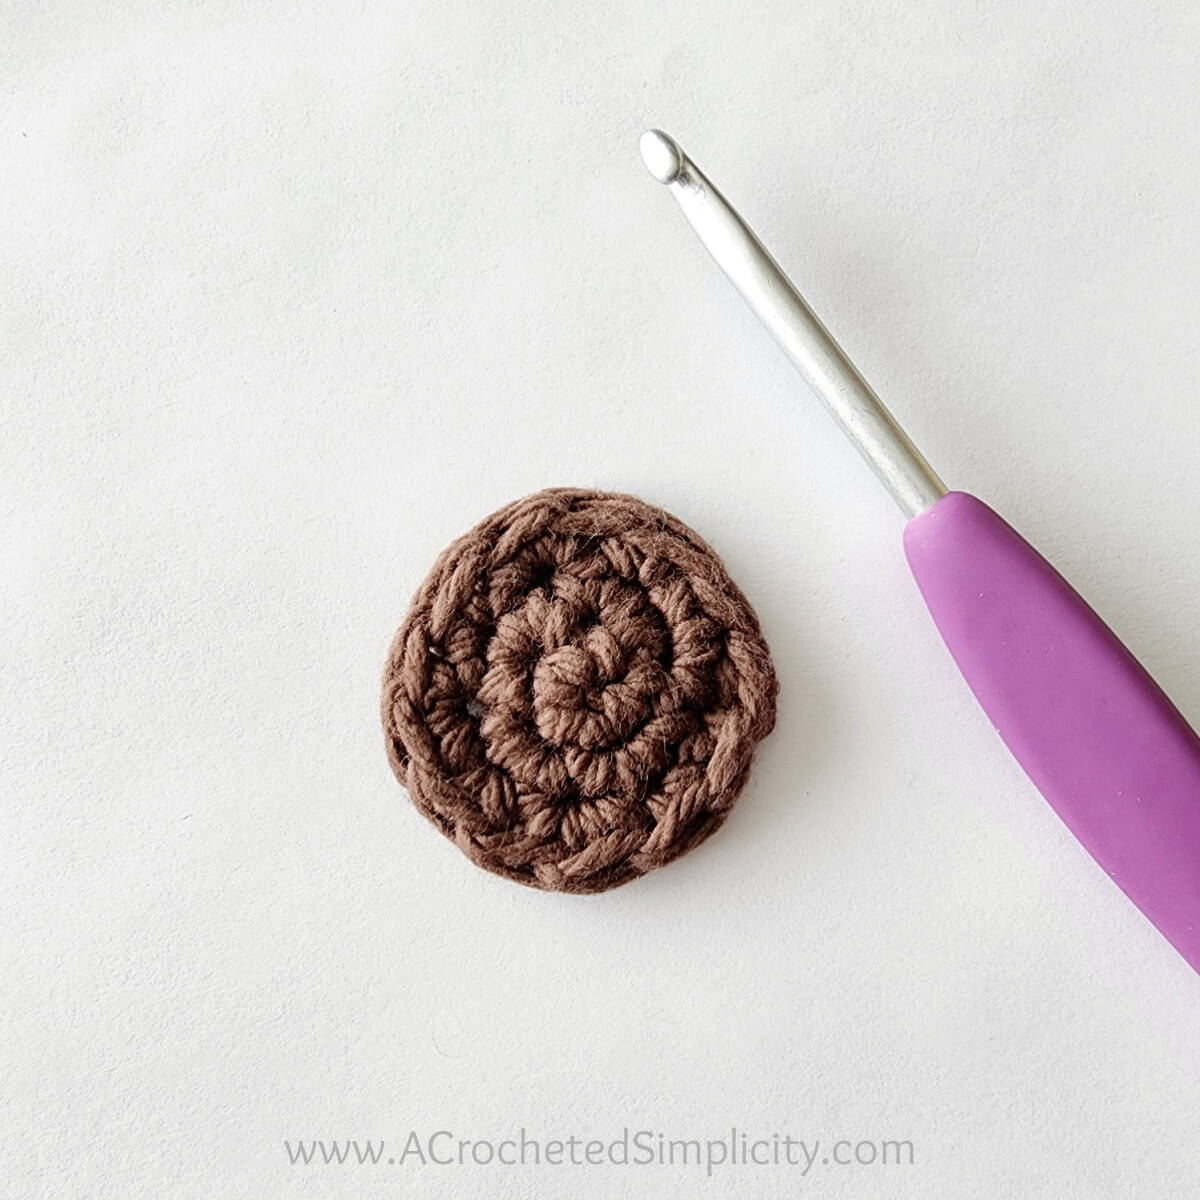 A small brown crocheted circle and purple crochet hook.